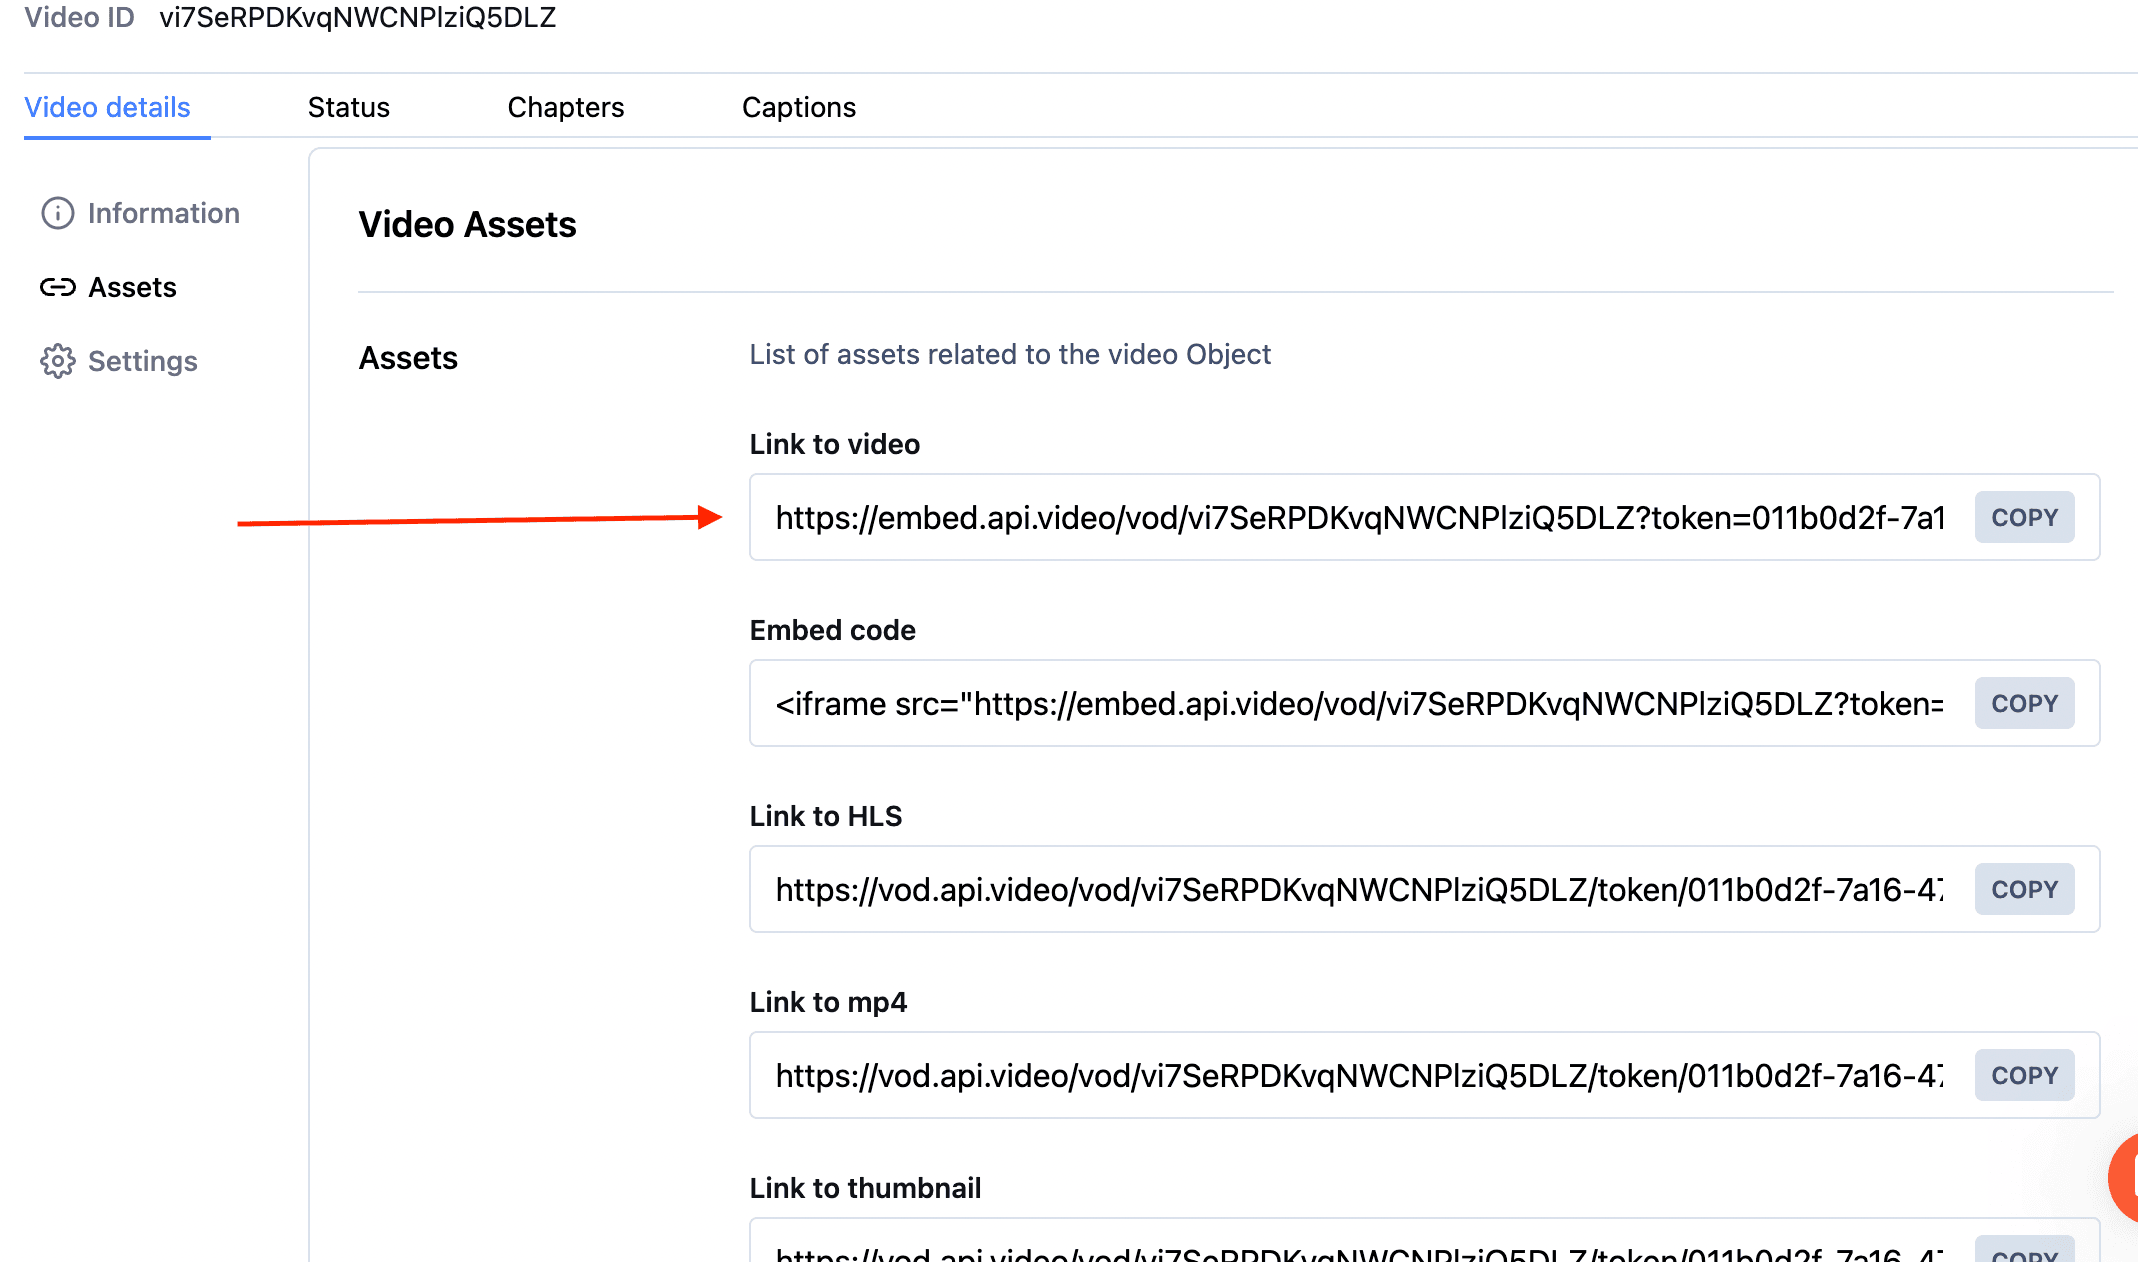 video URLs in the Assets section